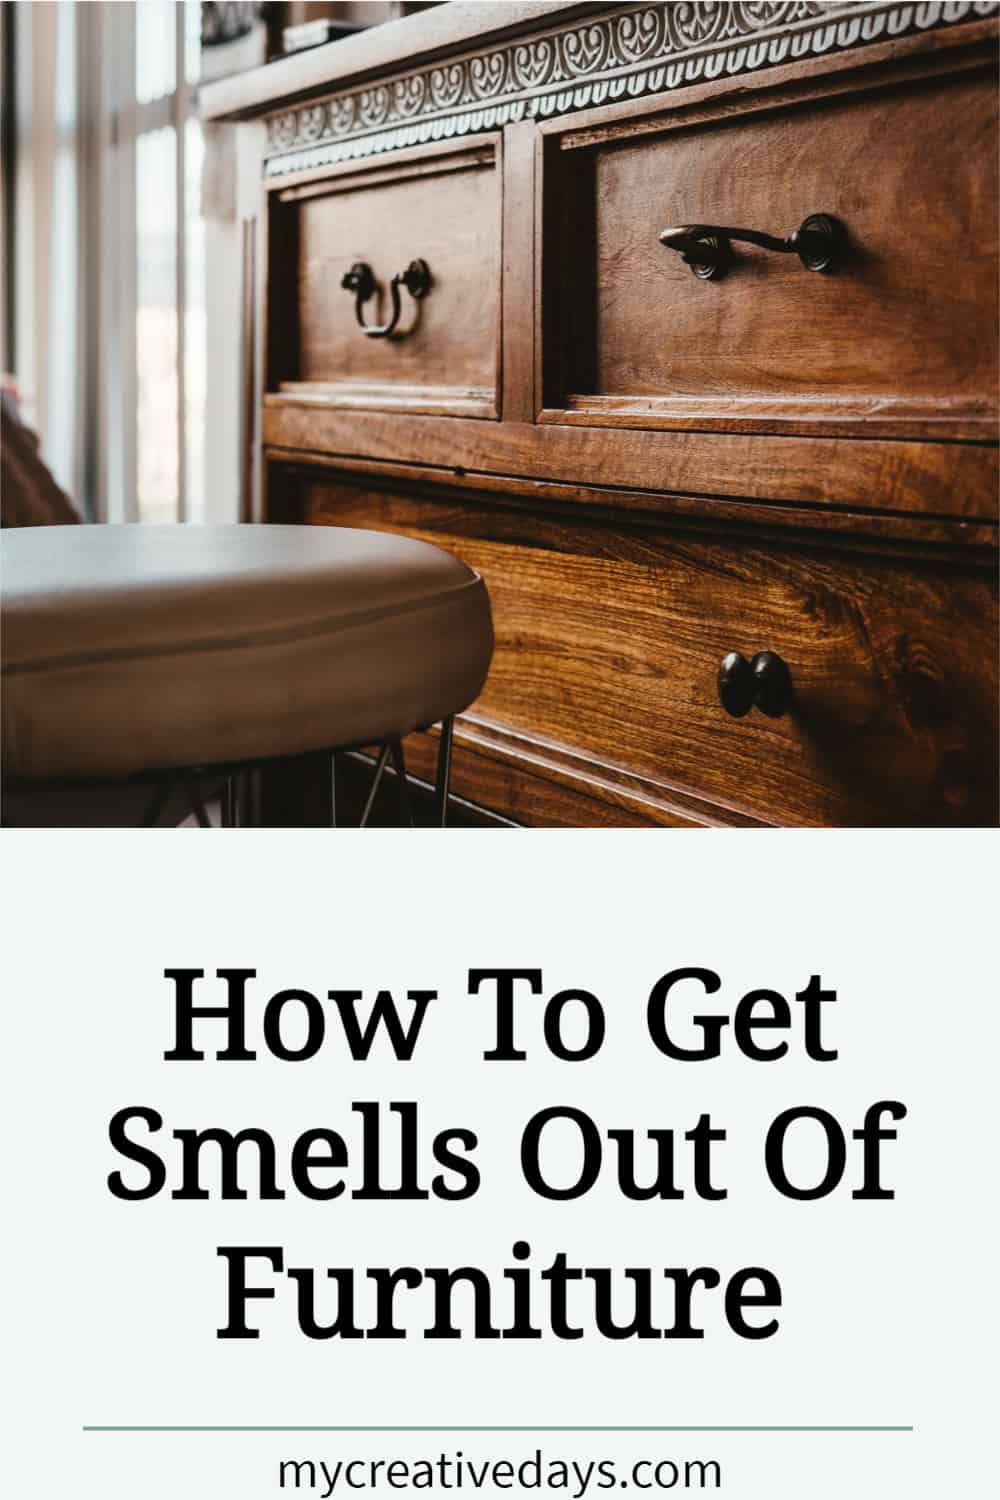 How To Get Smells Out Of Furniture